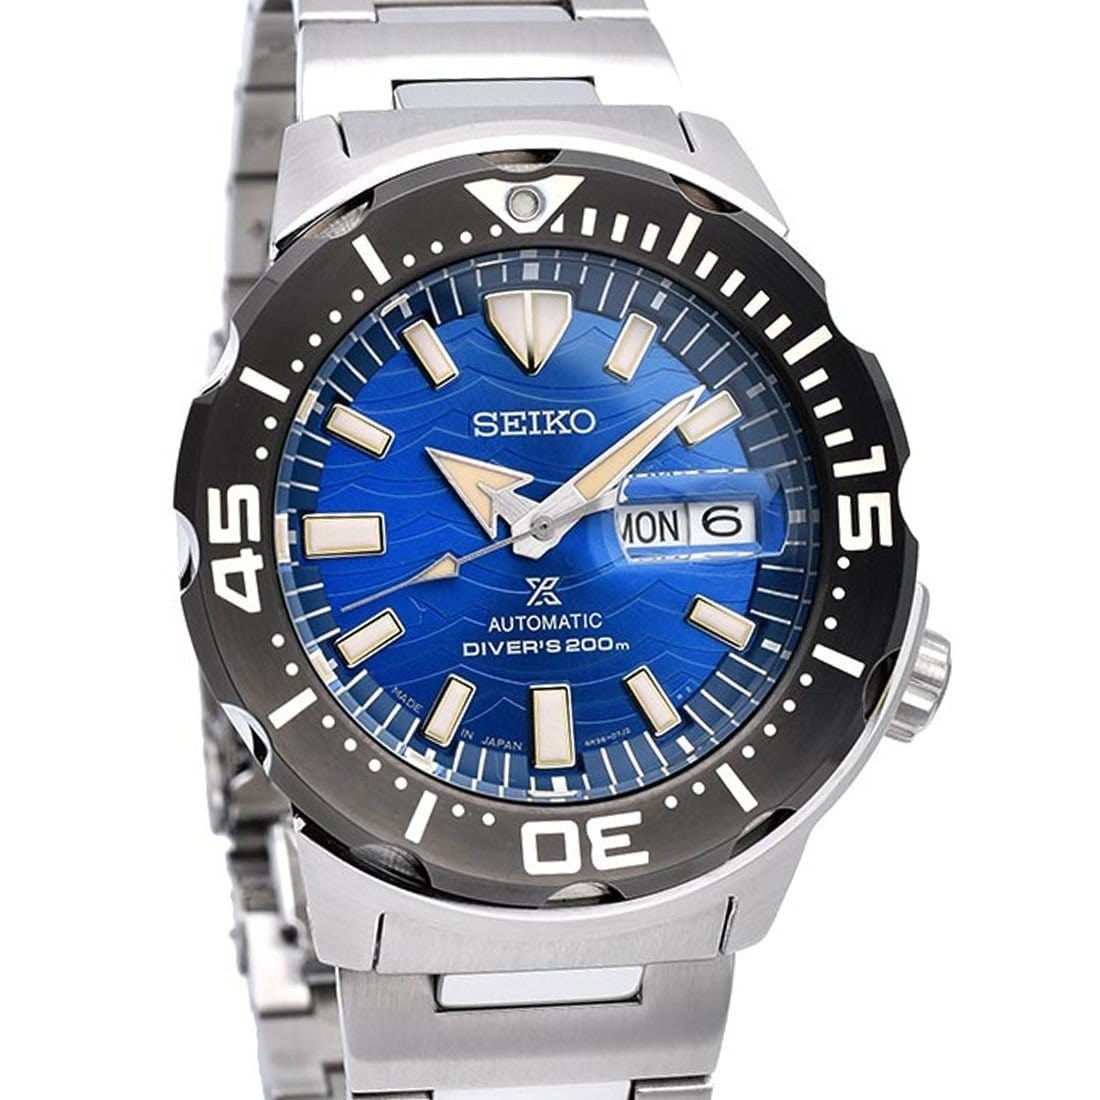 SBDY045 Seiko Monster Prospex Automatic 200M Blue Dial Mens Dive Watch